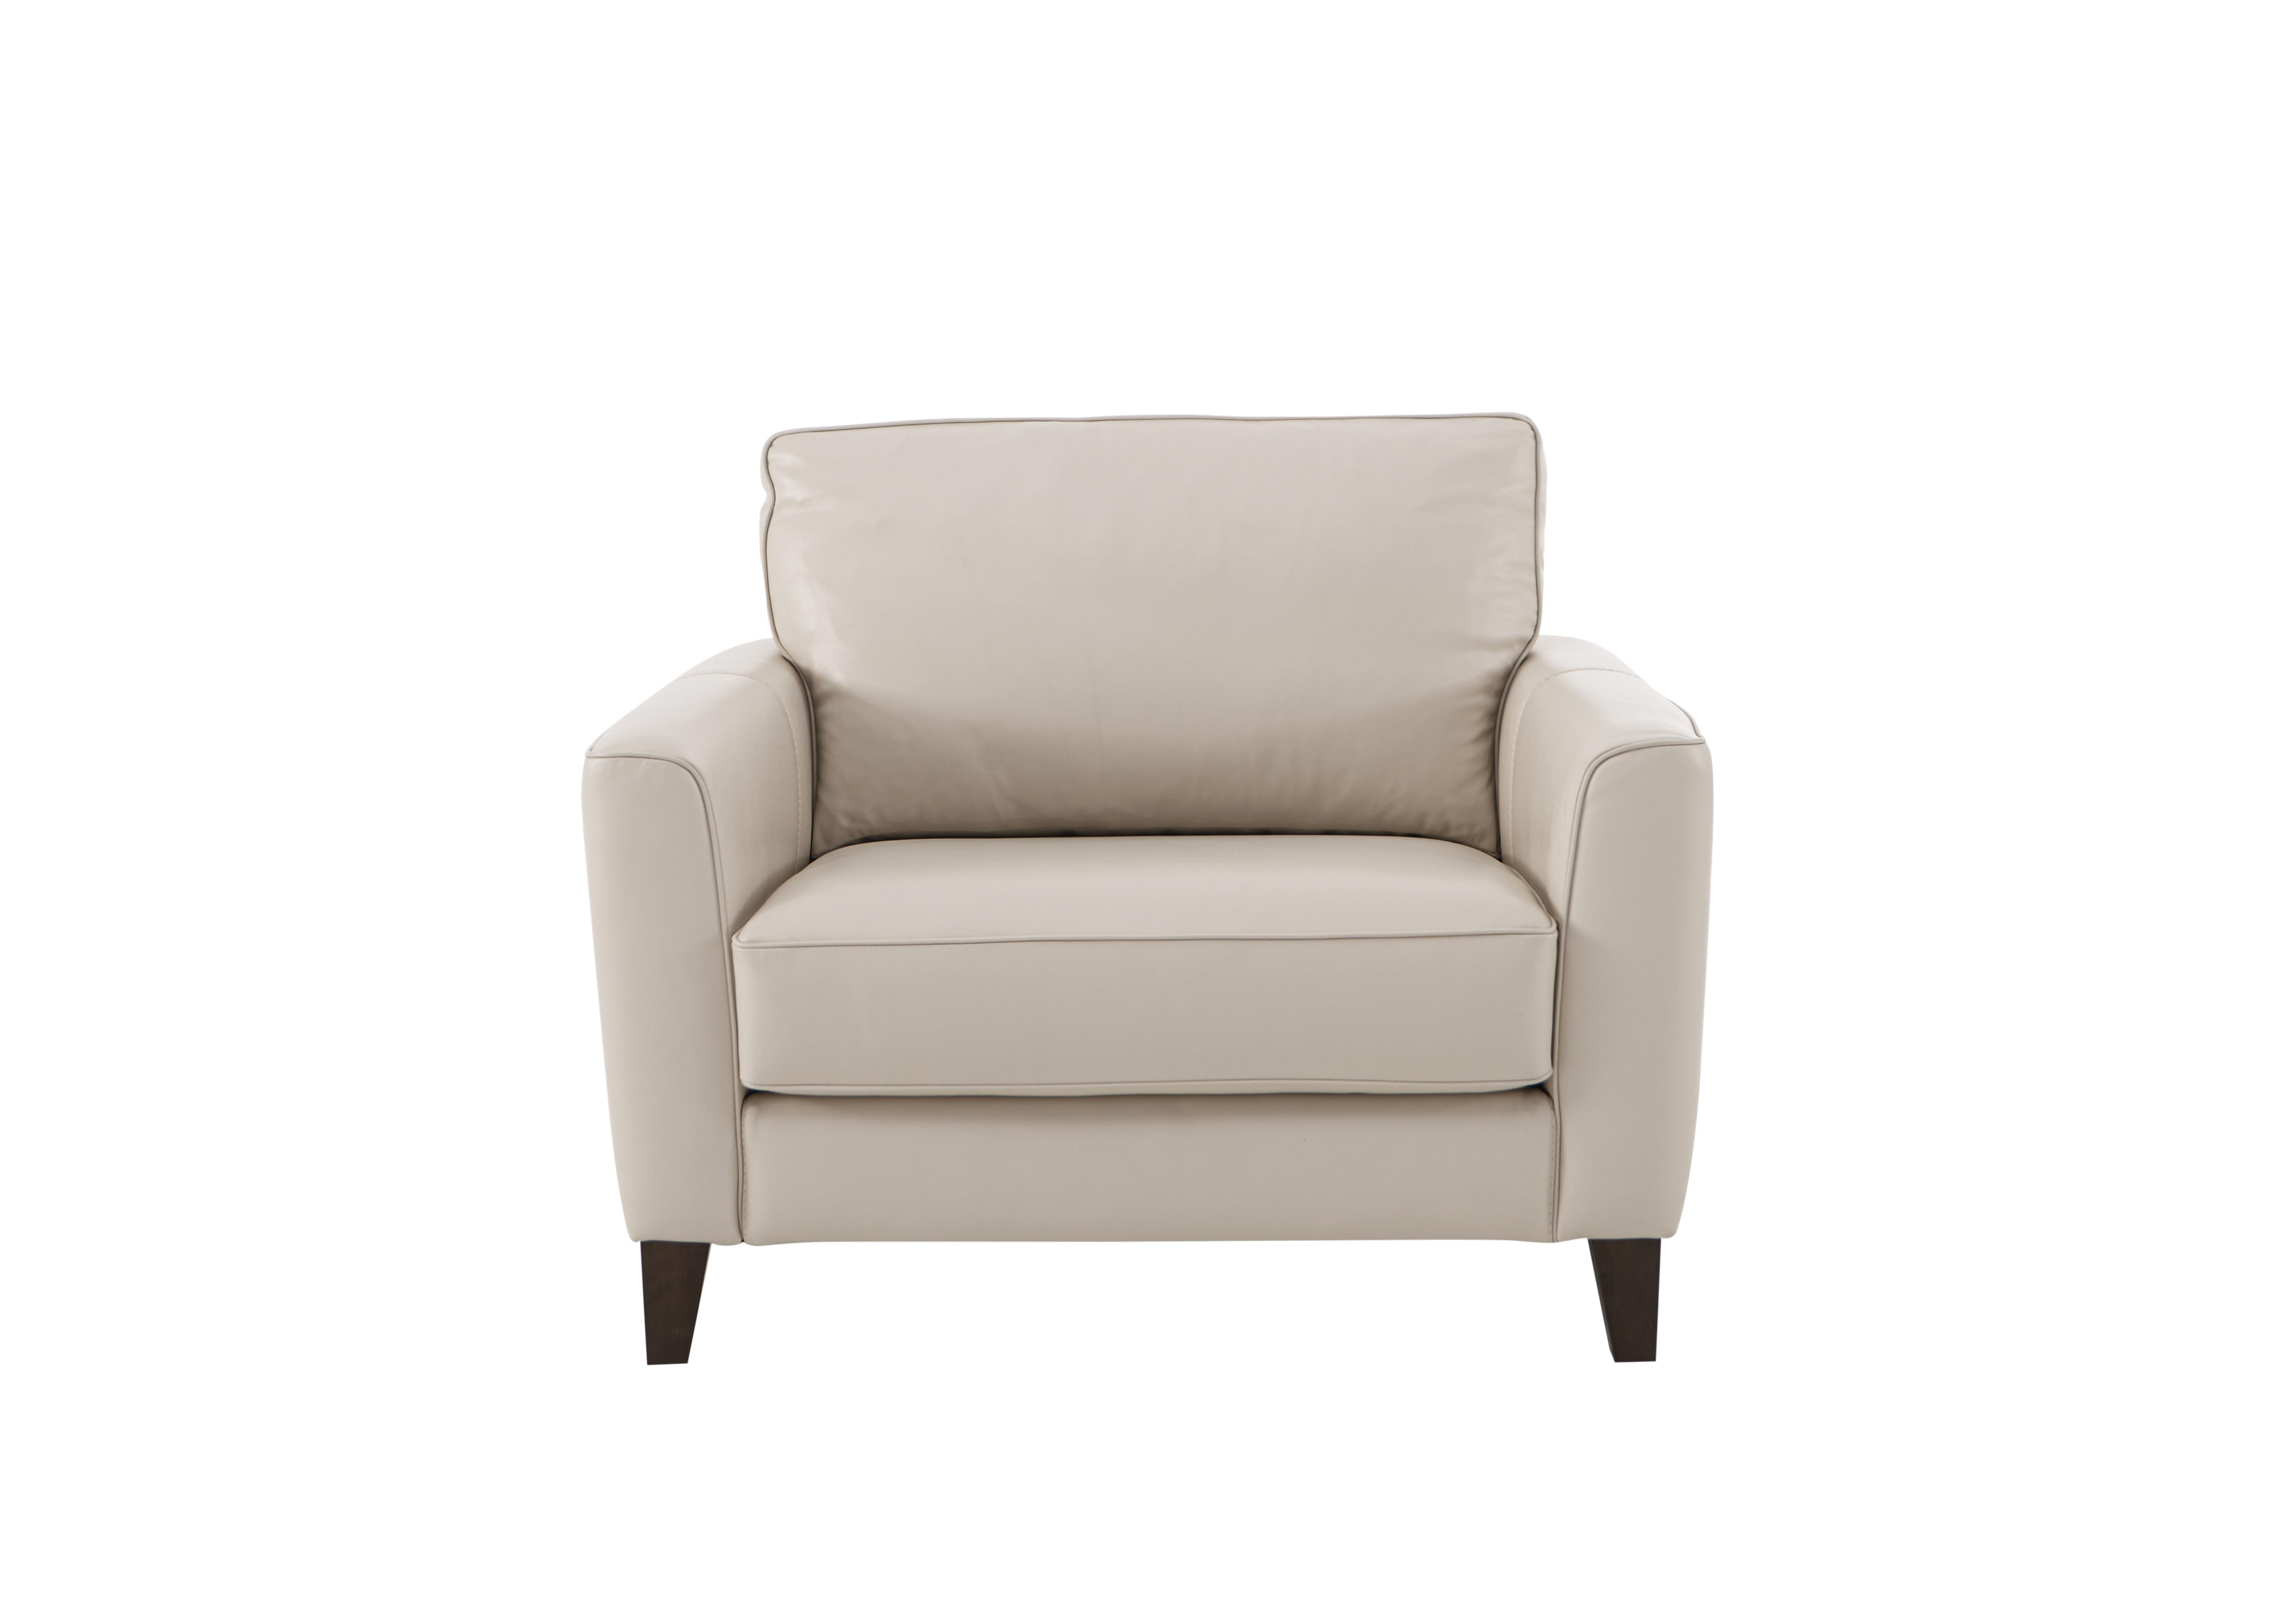 Brondby Leather Cuddle Chair in Bv-156e Frost on Furniture Village